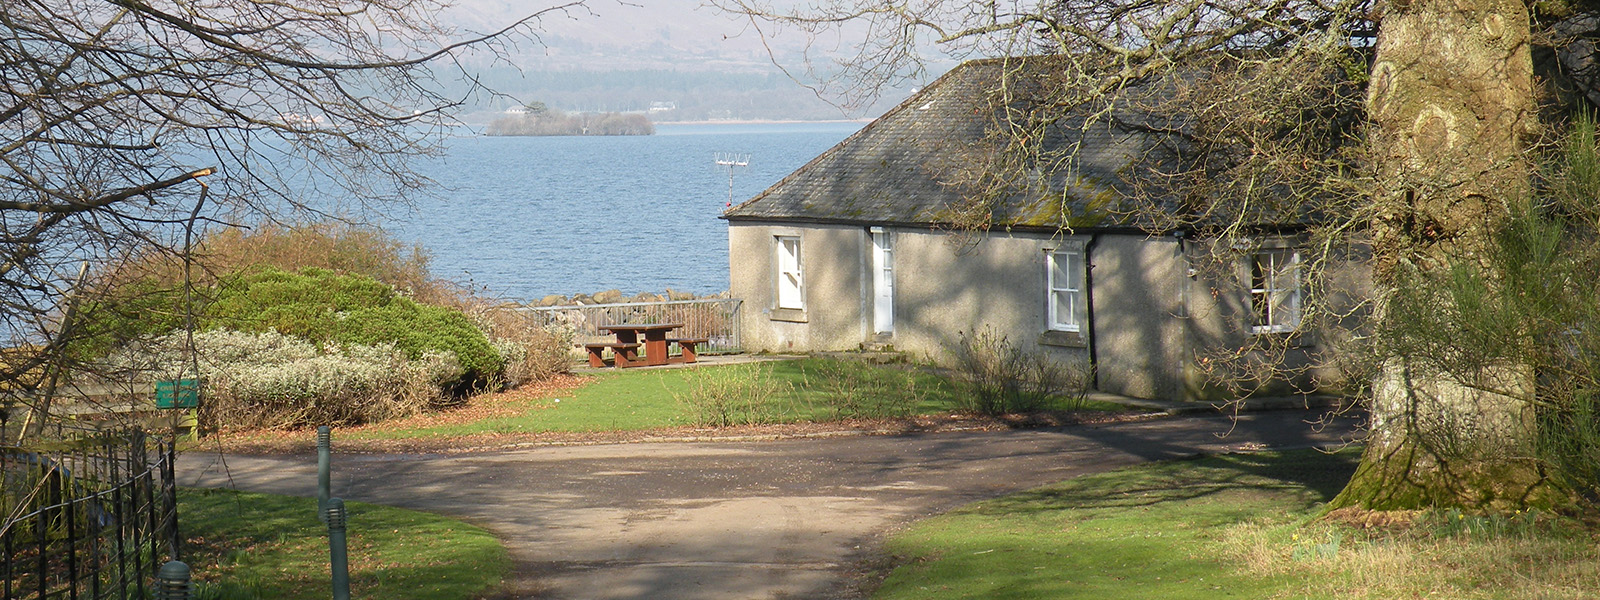 Ross Priory Lochside Cottage view of the loch